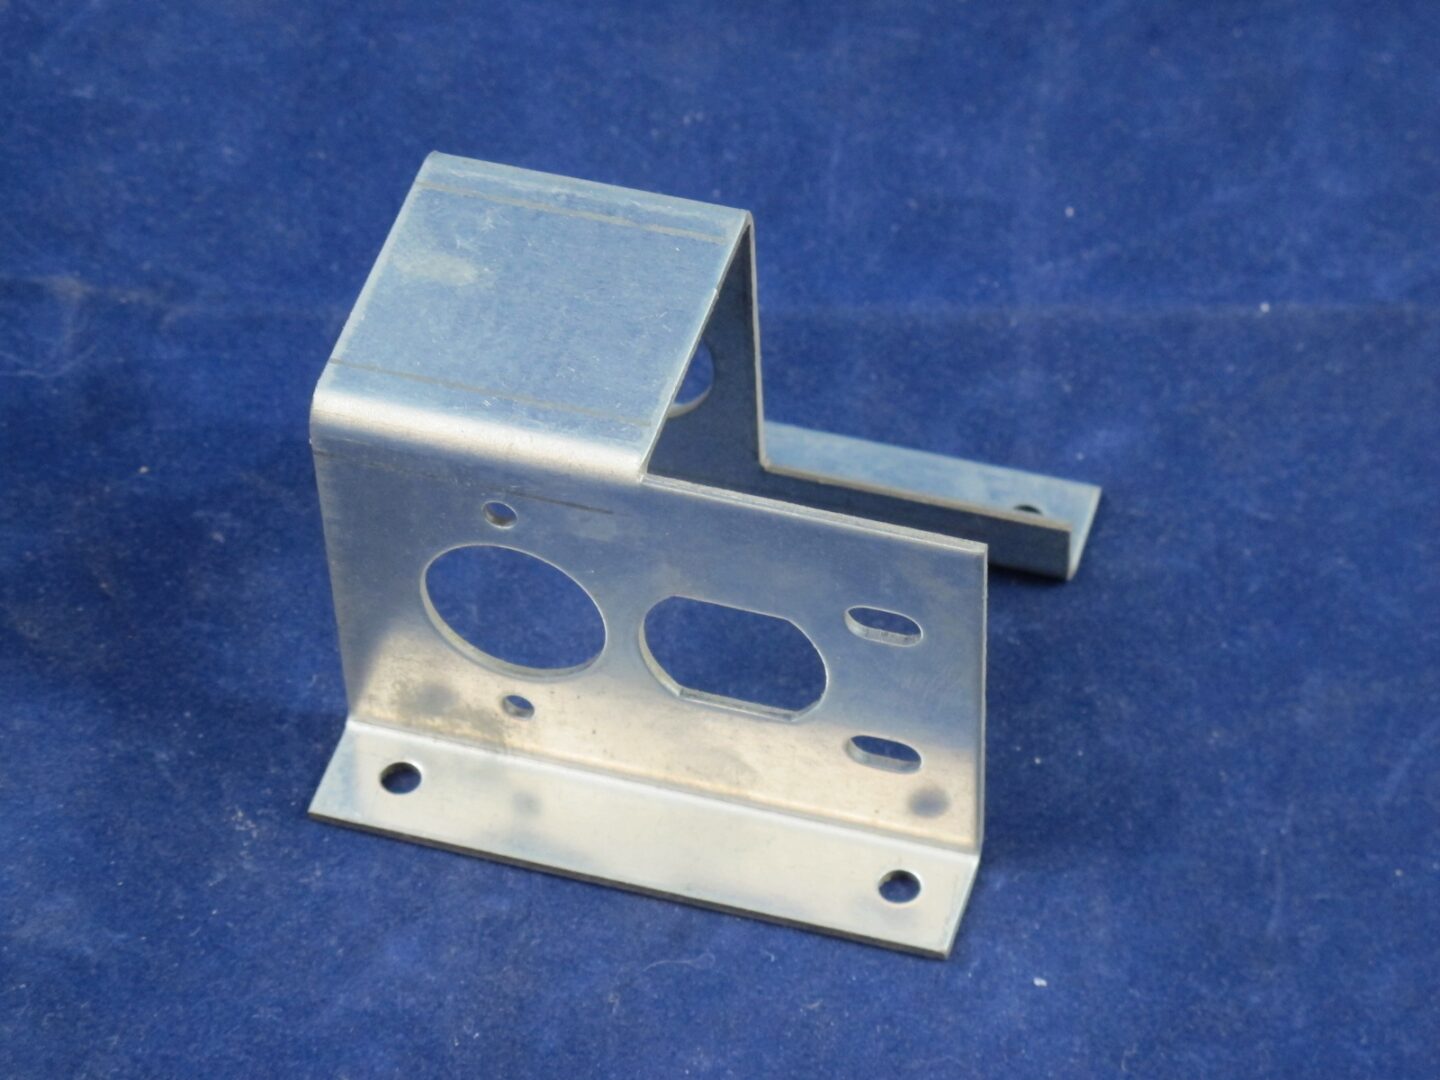 A VR Bracket with holes on a blue background.